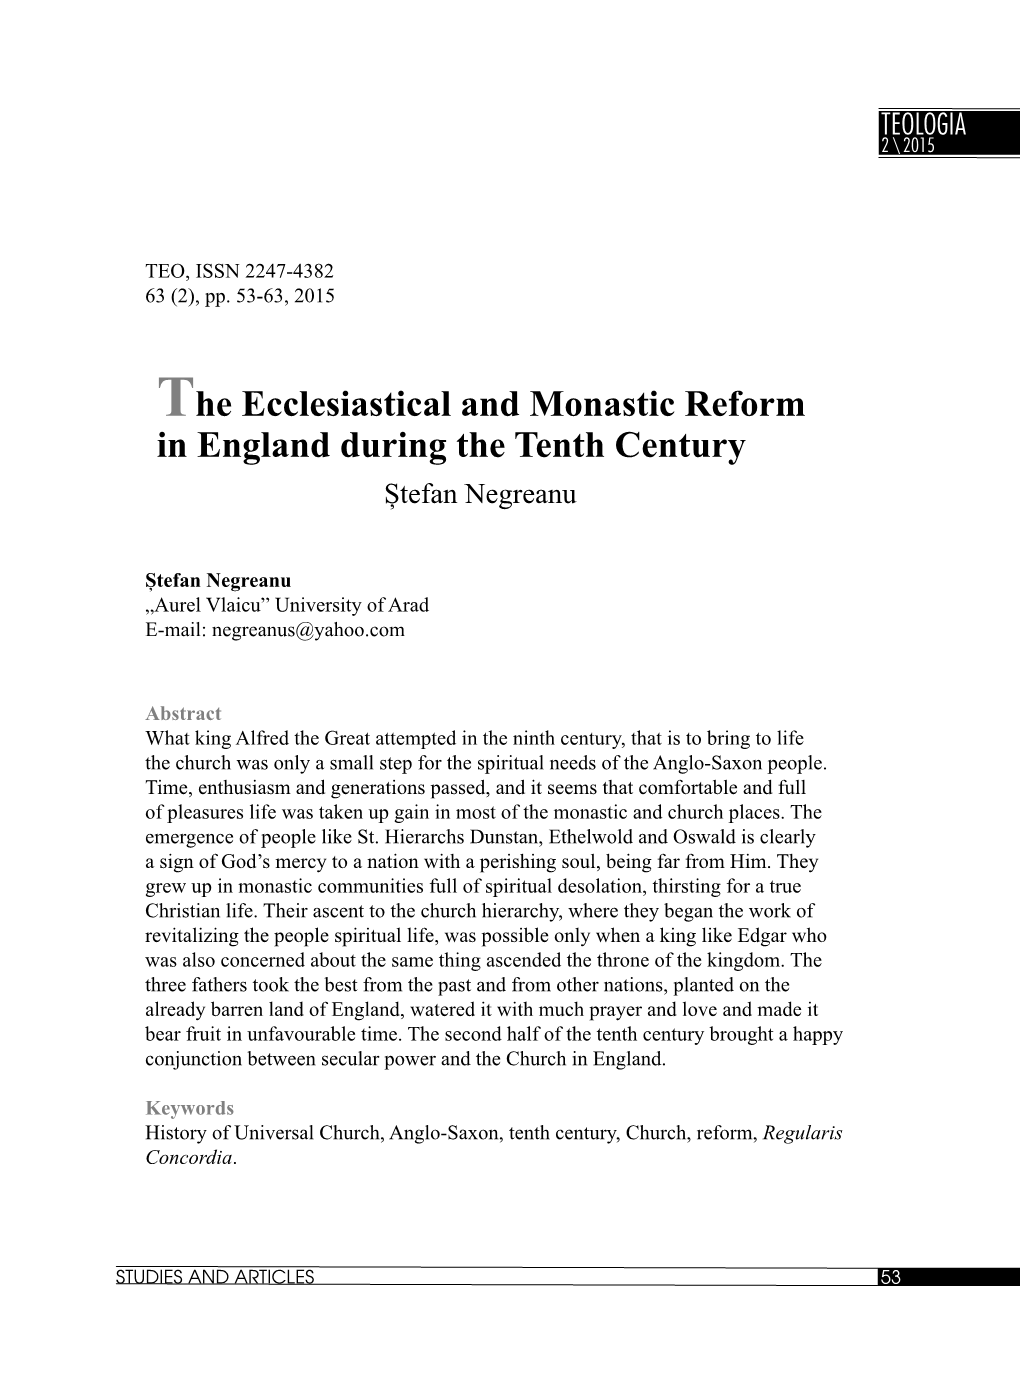 The Ecclesiastical and Monastic Reform in England During the Tenth Century Ștefan Negreanu